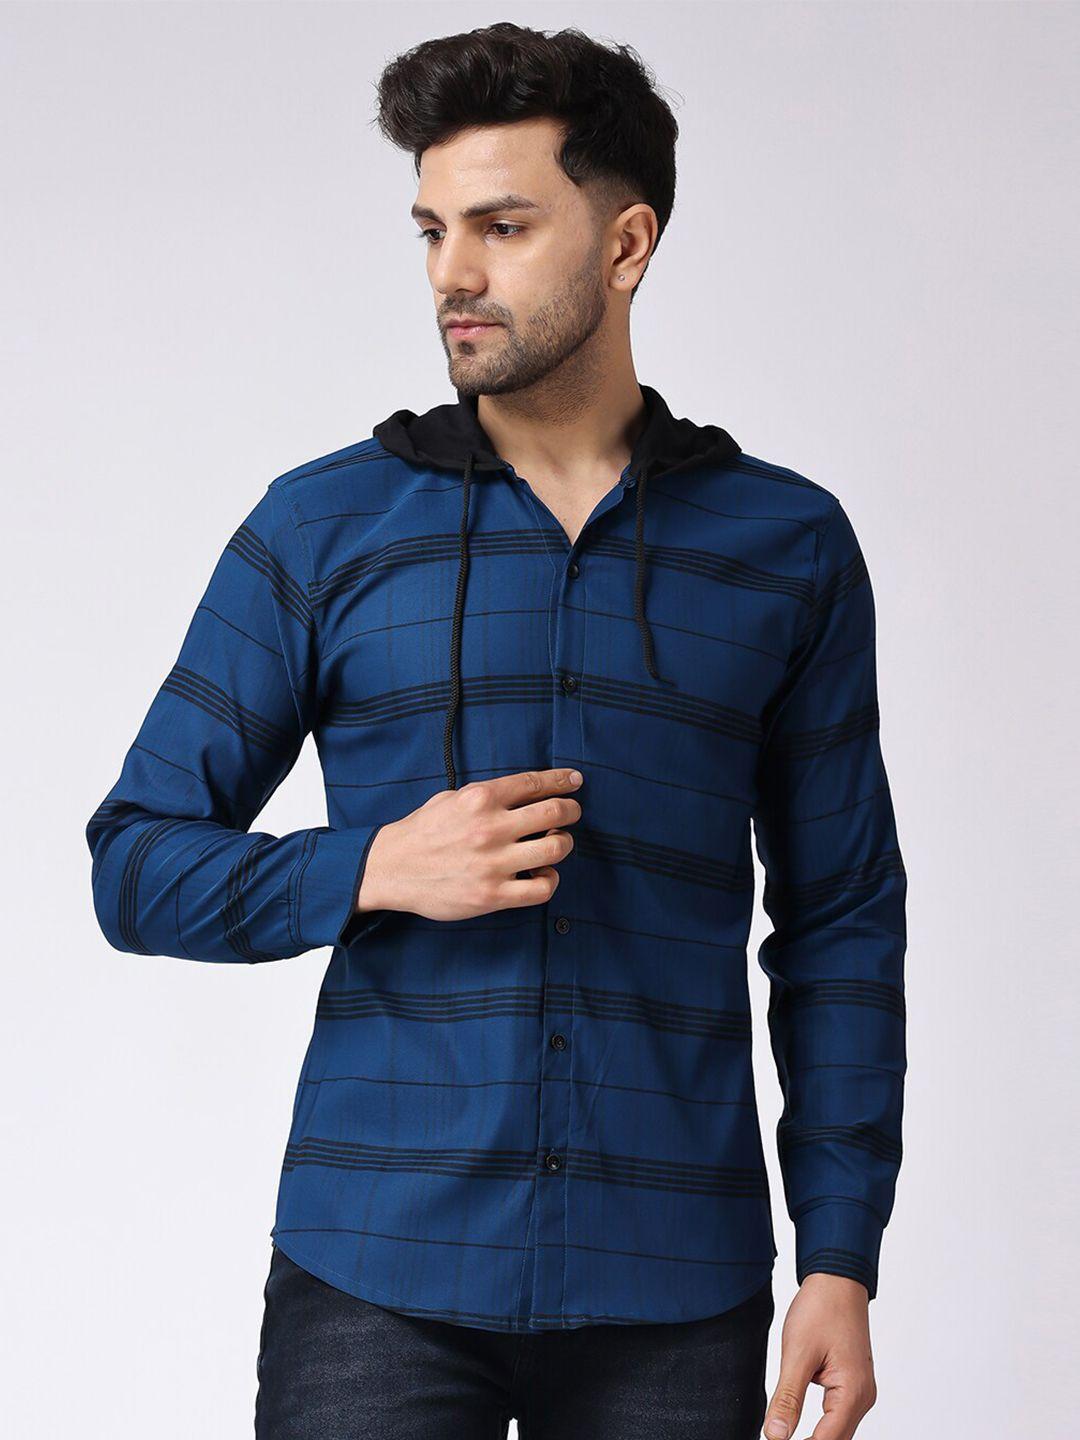 voroxy hooded checked casual shirt